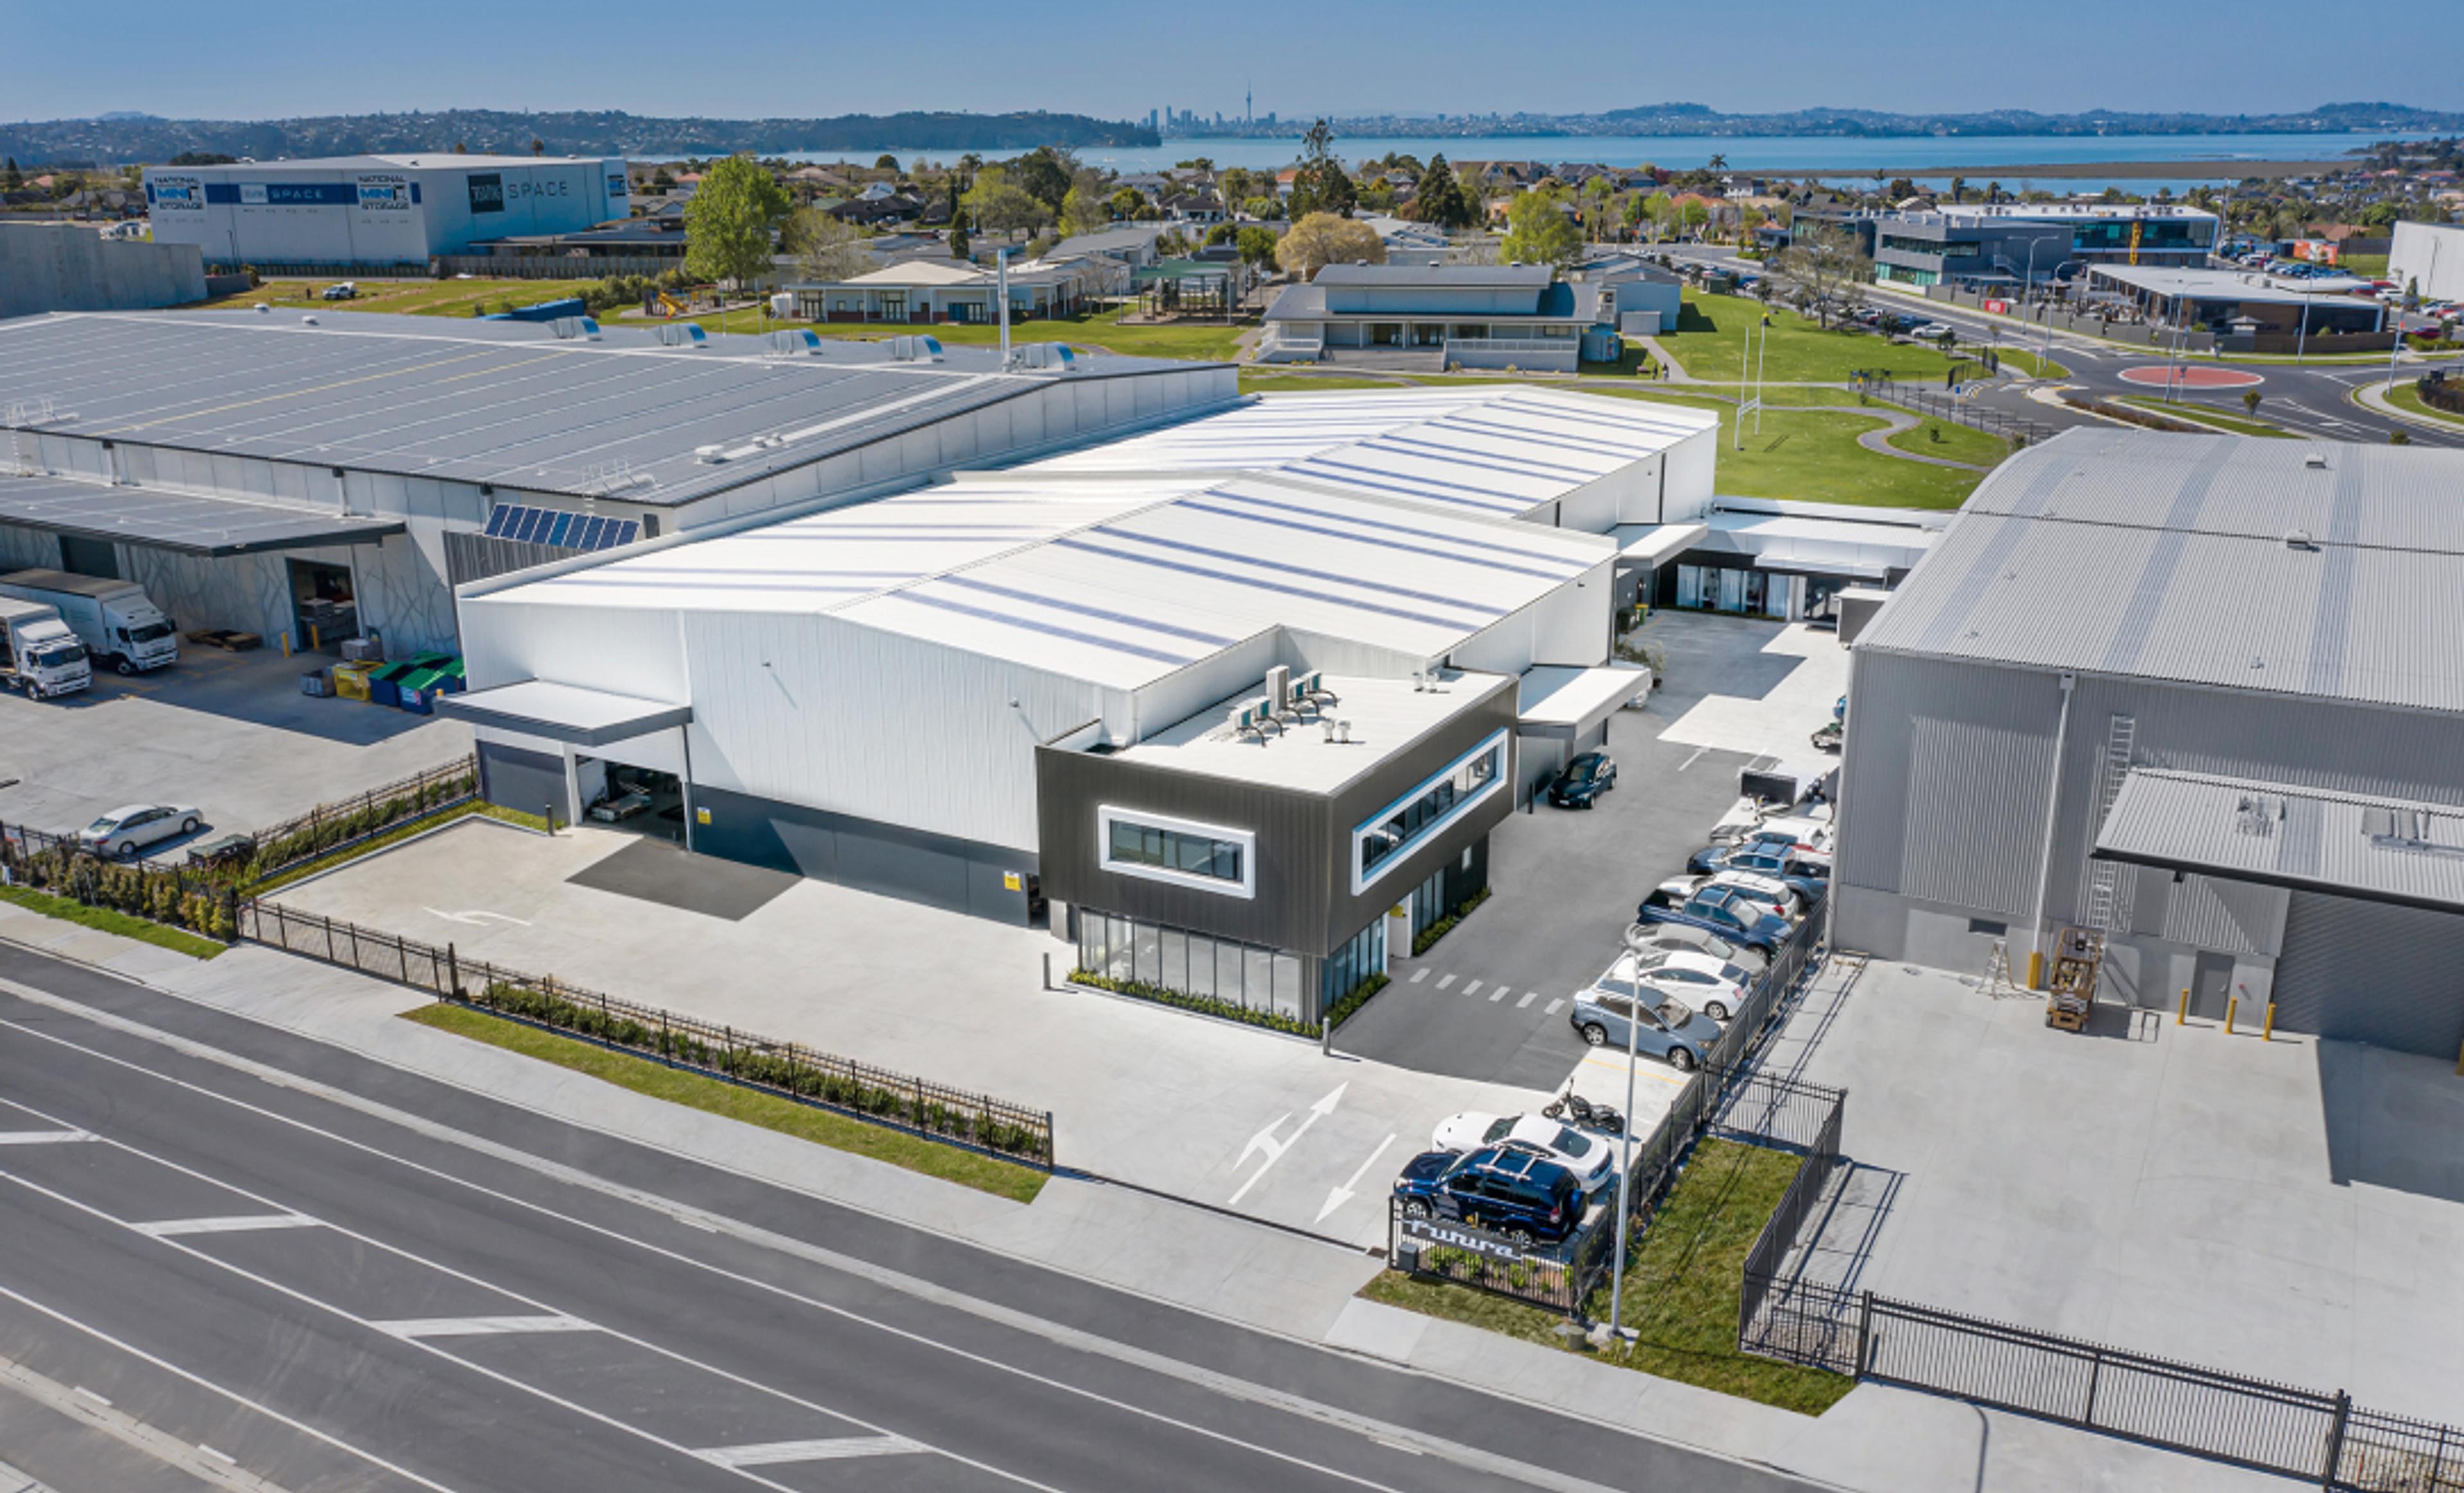 42 Westpoint Drive is located in the Hobsonville Industrial Precinct, within close proximity to Hobsonville Point and the Westgate Shopping centre and close to public transport and arterial routes to the Auckland CBD and North Shore.